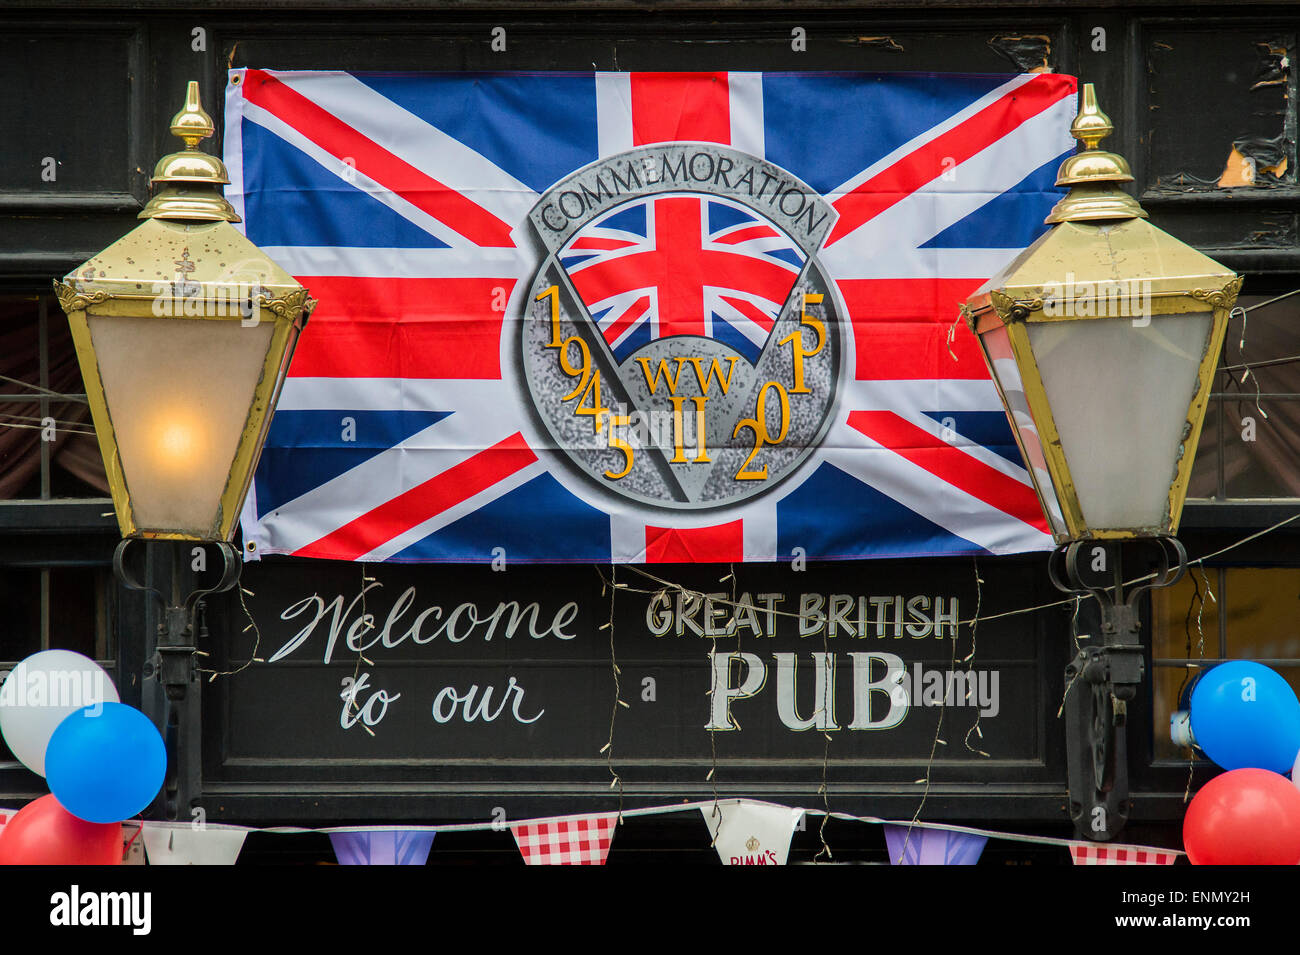 London, UK. 8th May, 2015. A Whitehall pub gets n the spirit. VE Day 70 commemorations - Three days of events in London and across the UK marking historic anniversary of end of the Second World War in Europe. Trafalgar Square, scene of jubilant celebrations marking the end of the Second World War in Europe on 8 May 1945, plays a central part in a host of national events, which include a Service of Remembrance at the Cenotaph, a concert in Horse Guards Parade, a Service of Thanksgiving at Westminster Abbey, a parade of Service personnel and veterans and a flypast. Credit:  Guy Bell/Alamy Live N Stock Photo